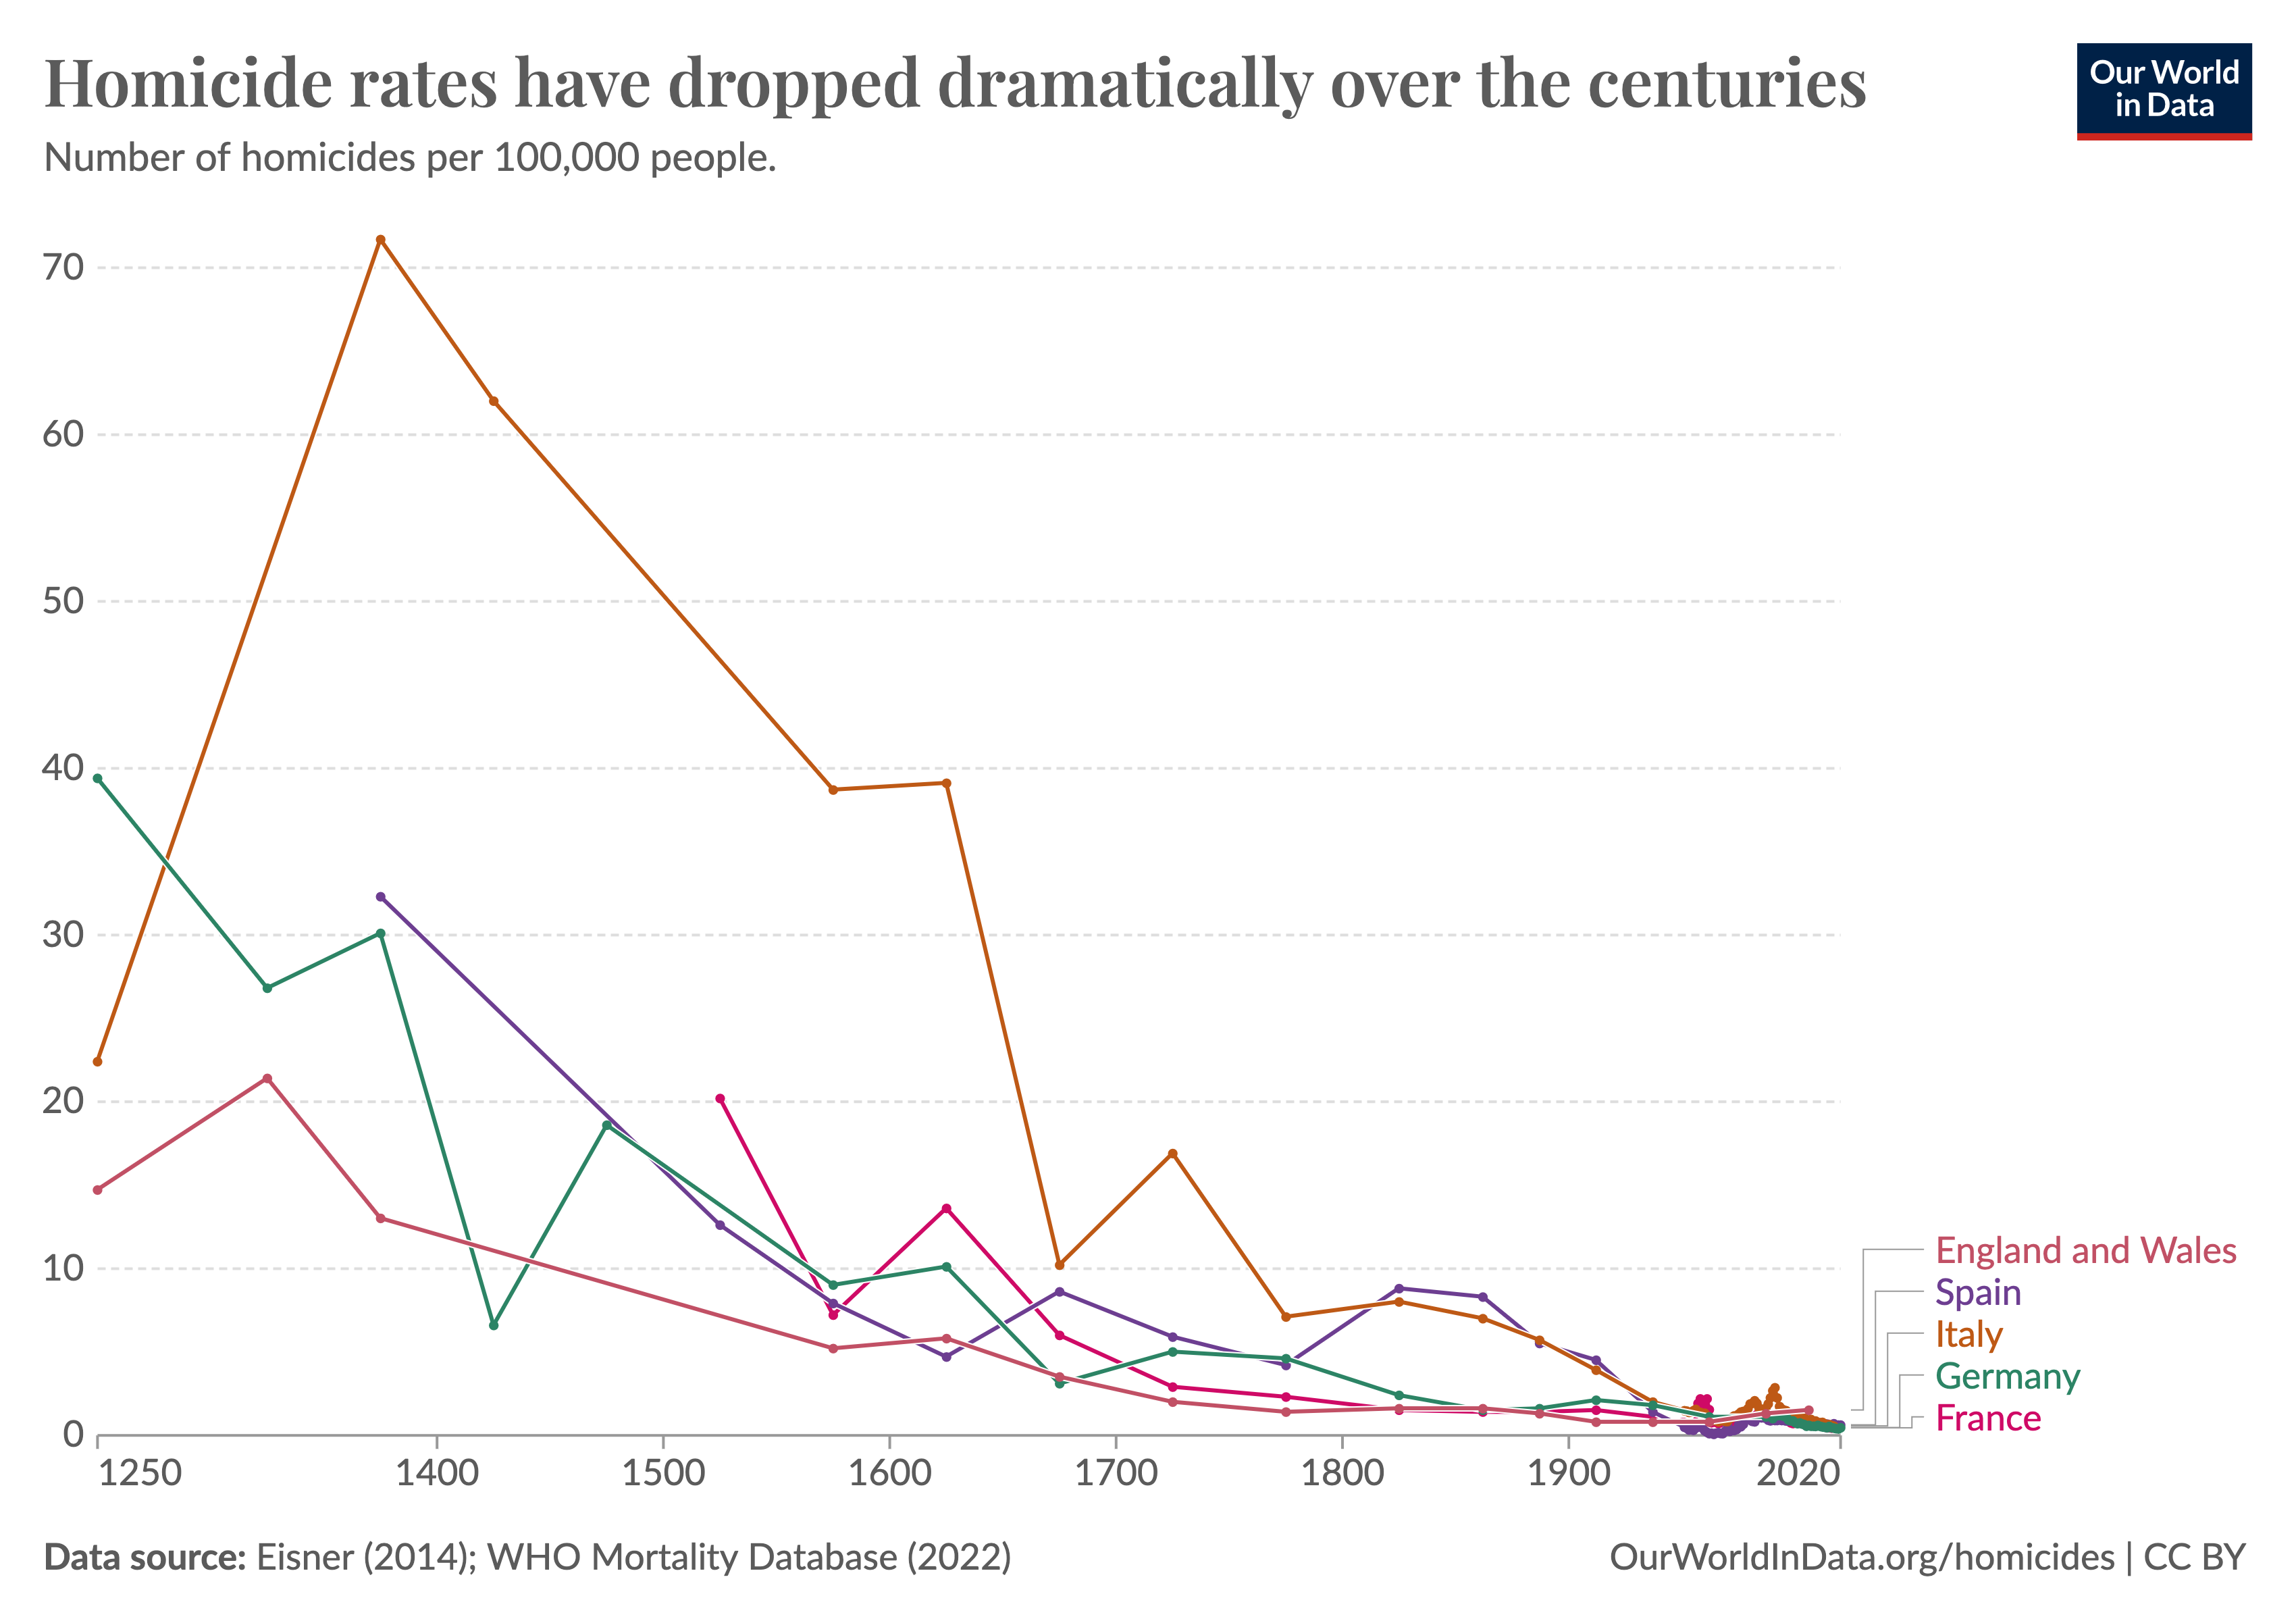 Line chart showing that homicide rates have declined a lot in England, Spain, Italy, Germany, and France over the last eight centuries.